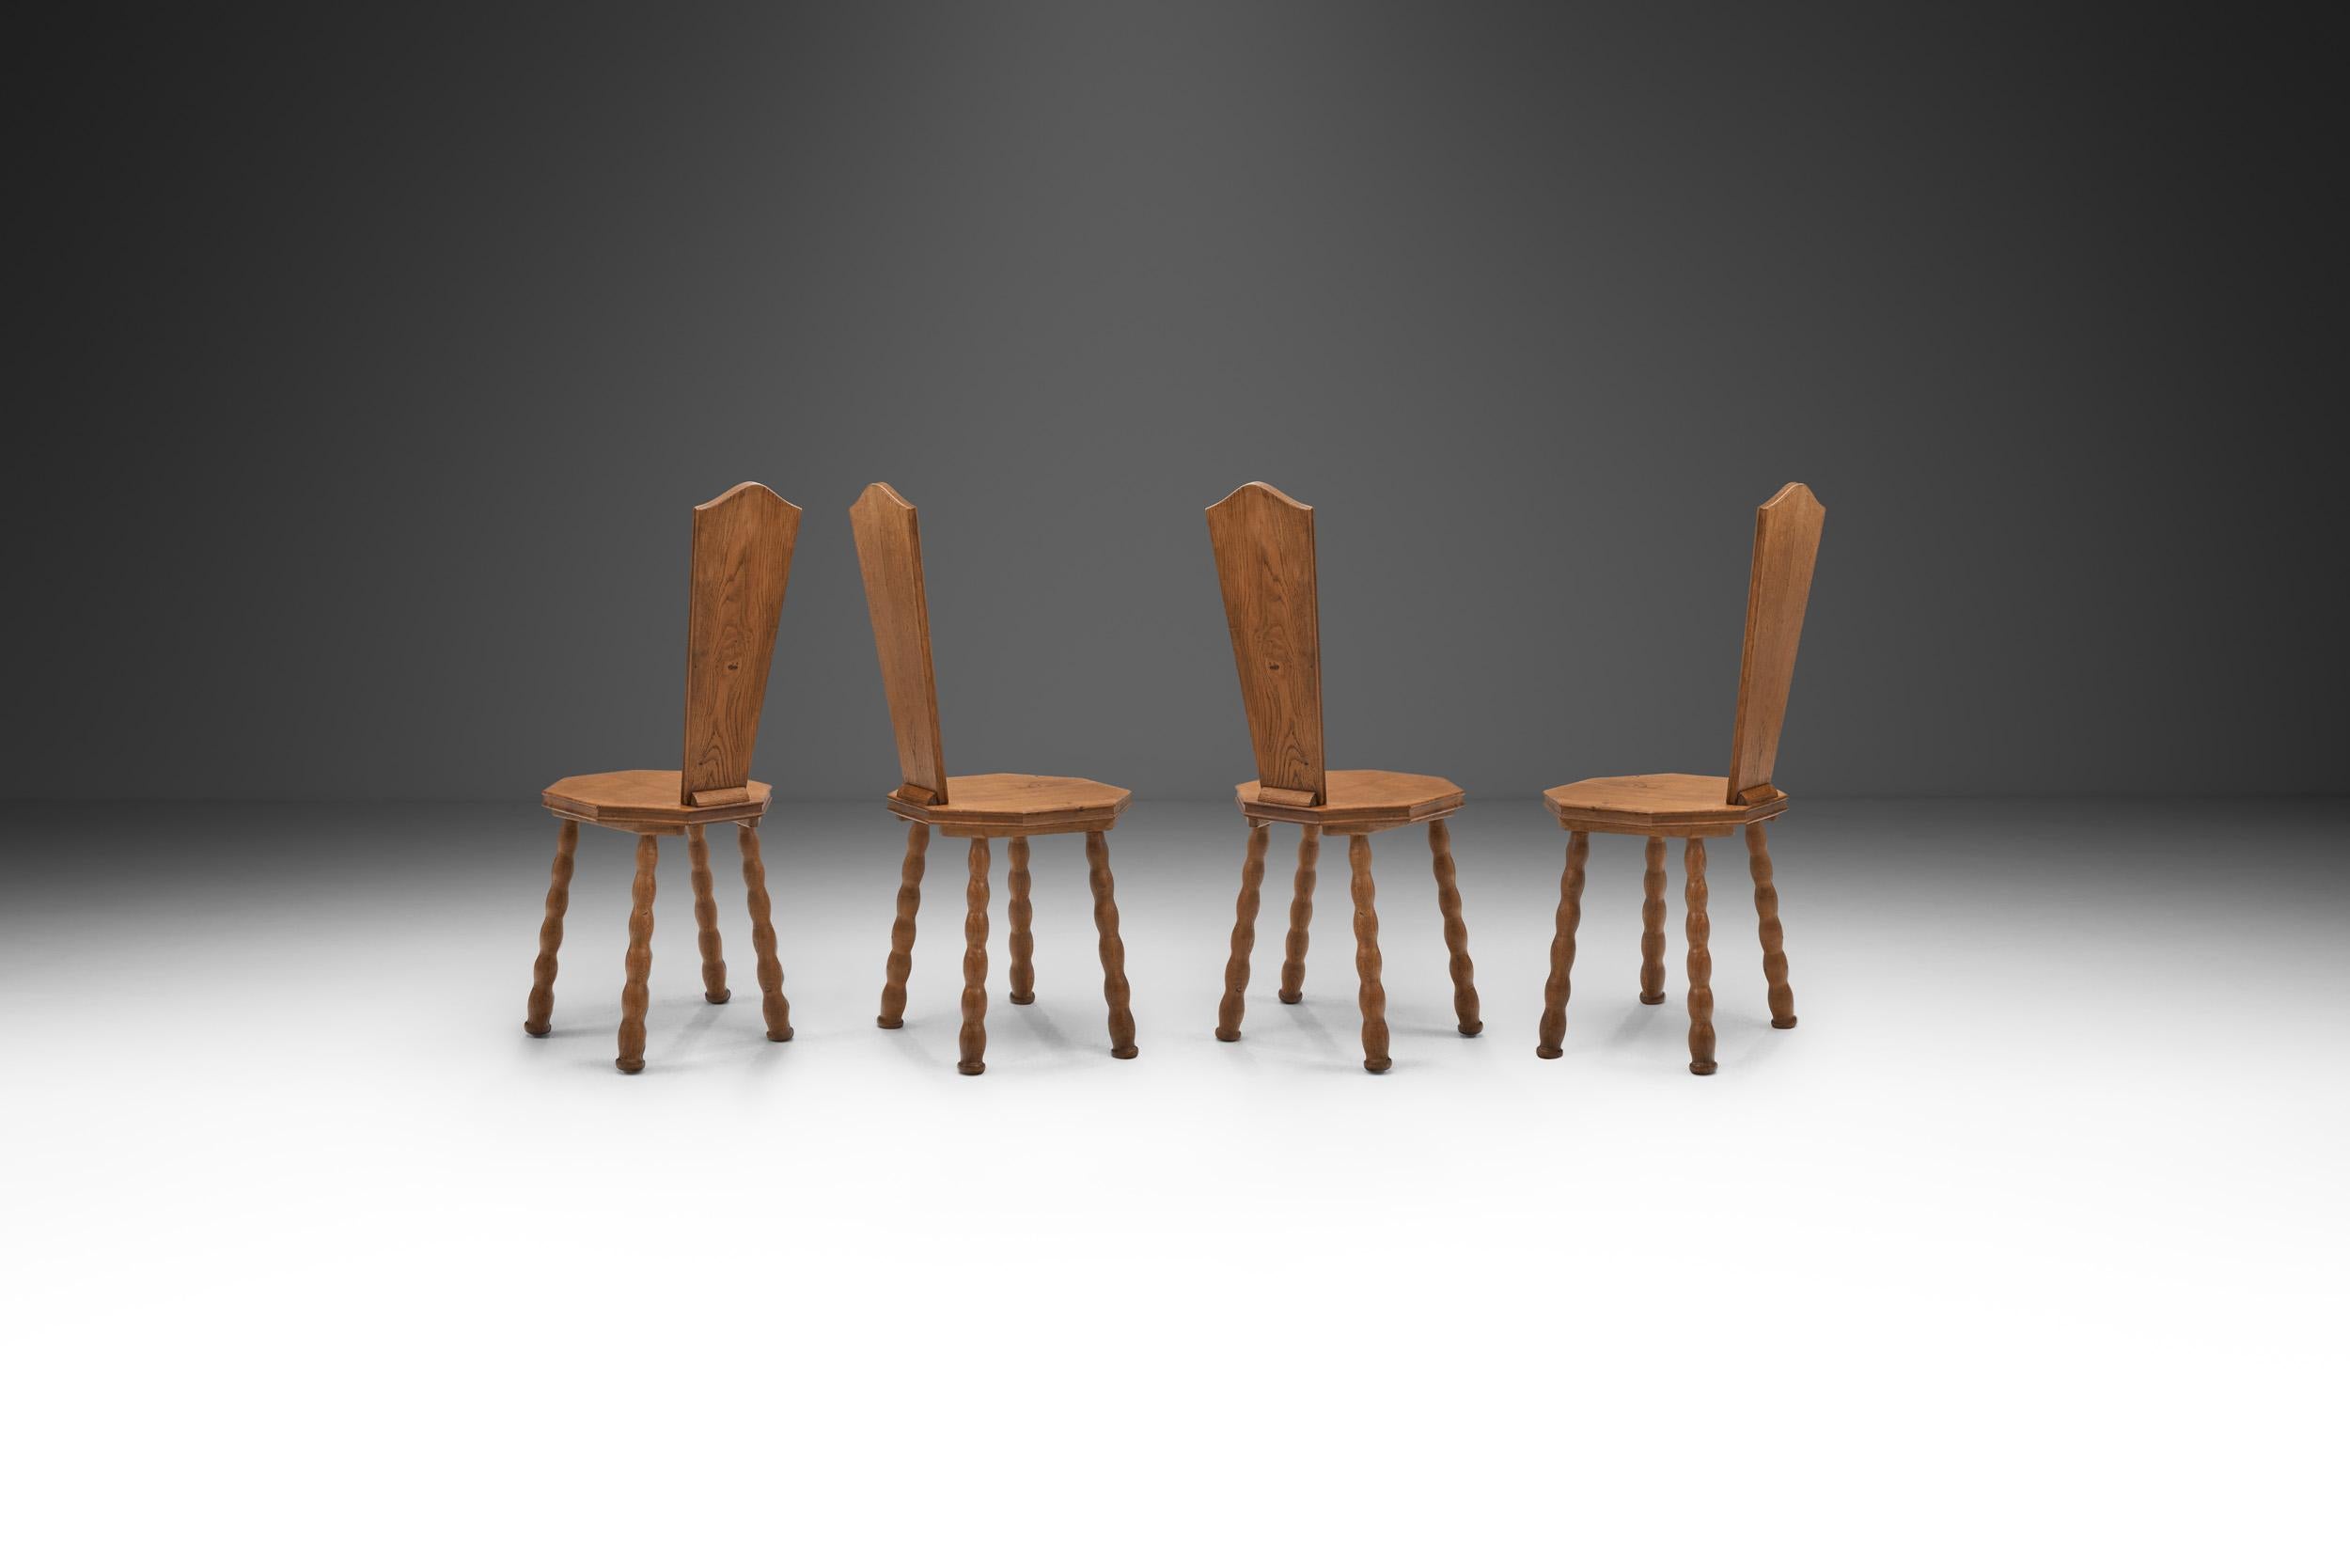 European Set of 4 Sculptural Patinated Oak Spinning Chairs, Europe ca early 20th century For Sale